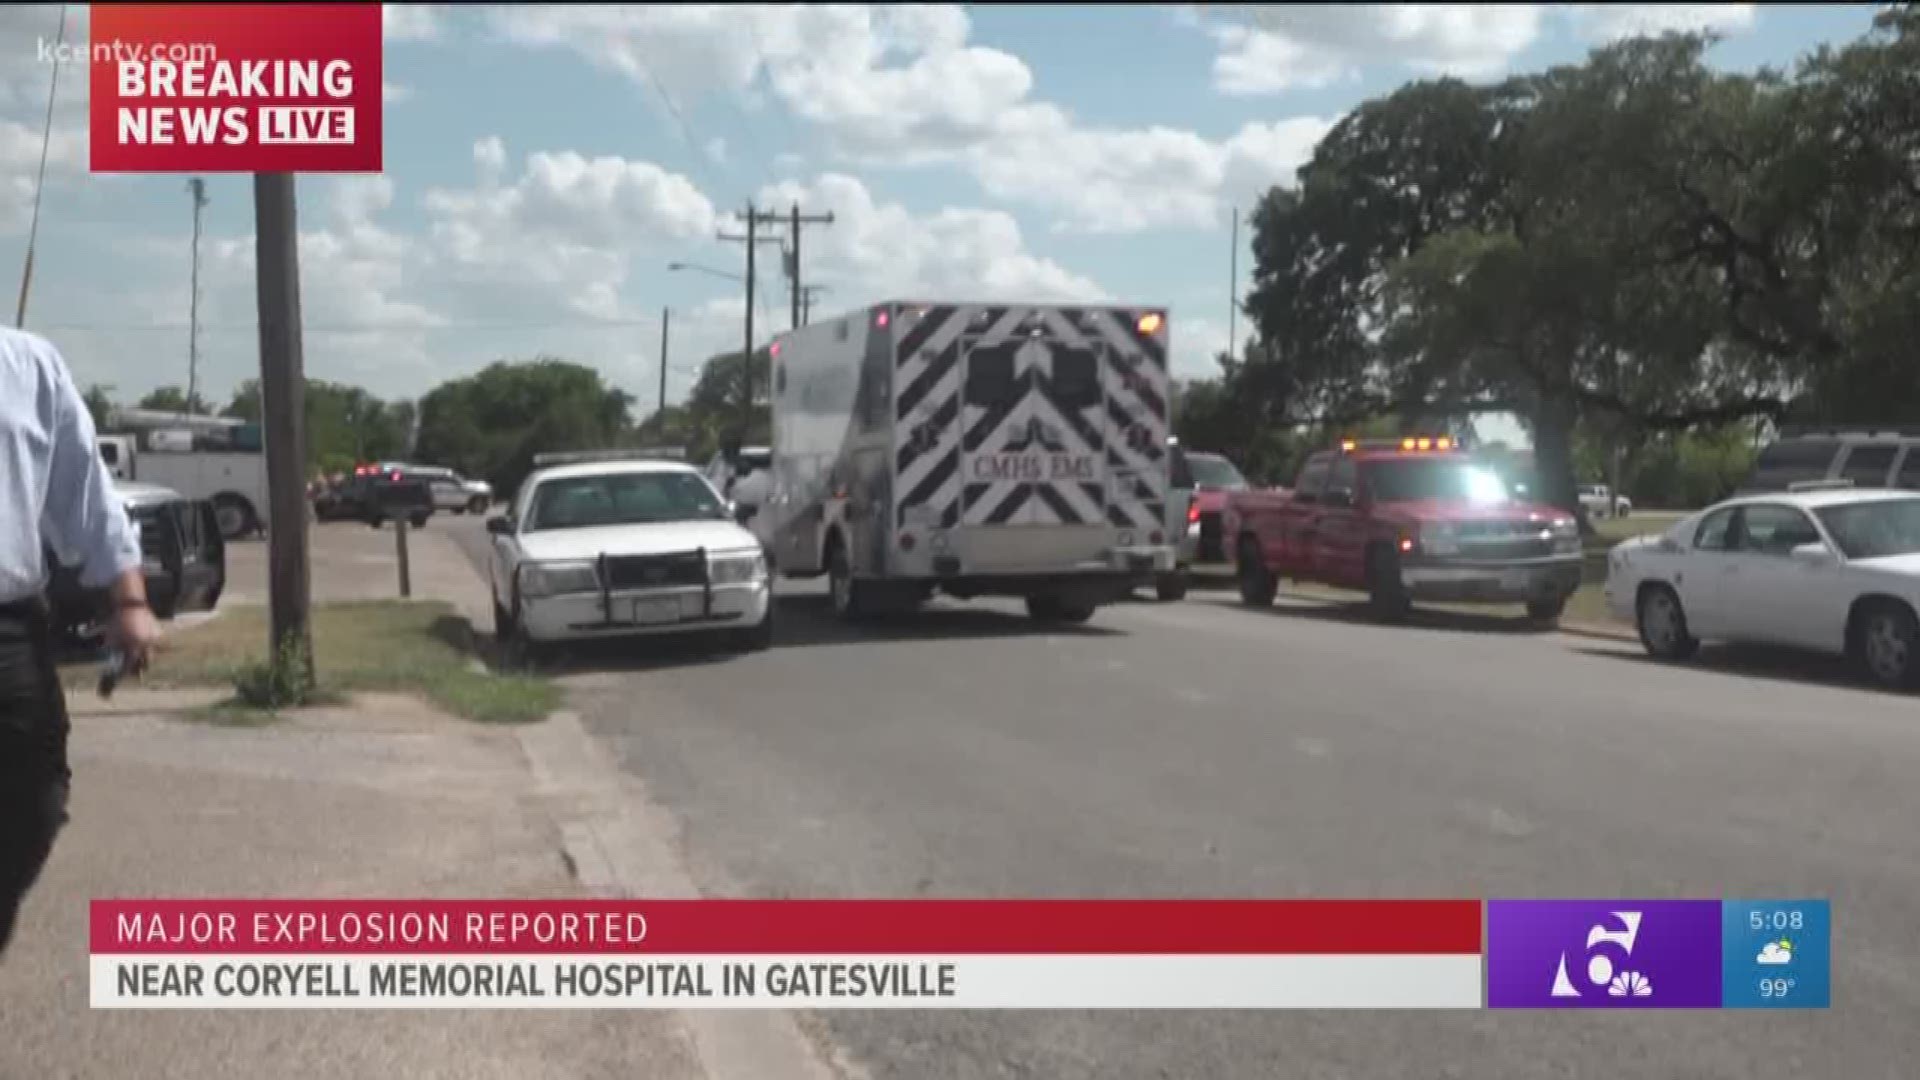 A man who was just a few blocks from Coryell Memorial Hospital at the time of Tuesday's explosion said it shook the place where he was and felt like an earthquake. 